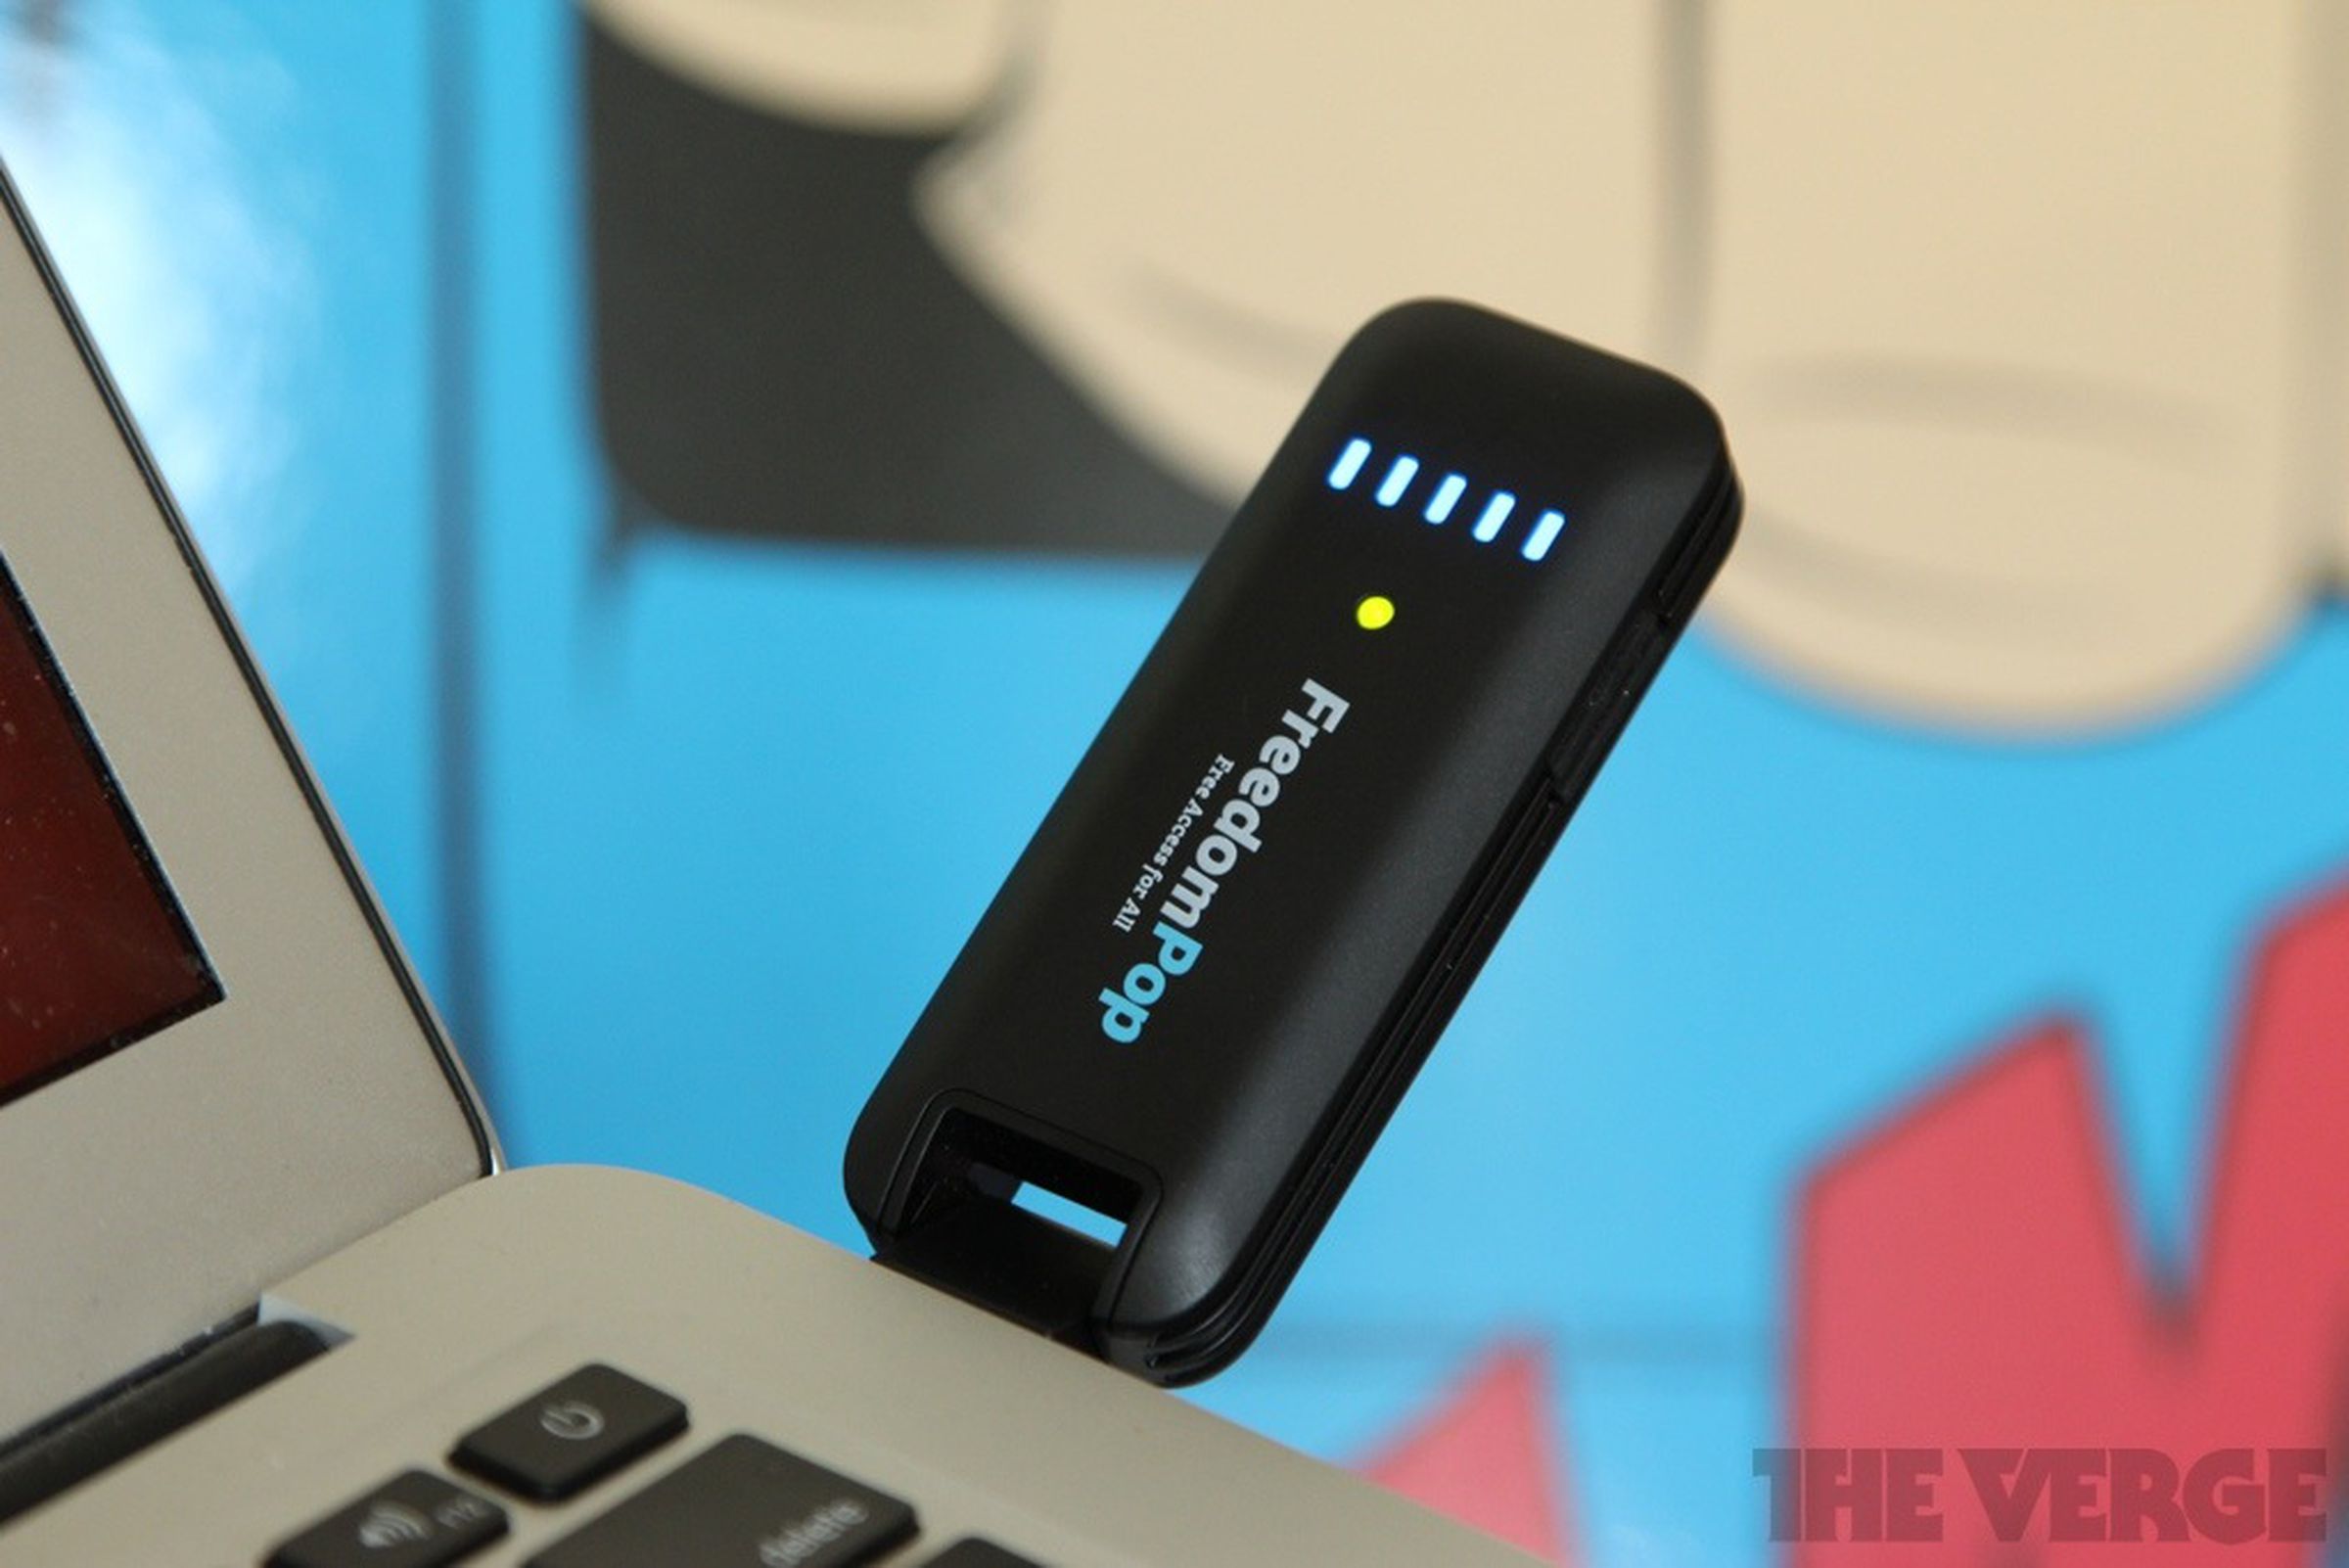 FreedomPop WiMAX dongle and hotspot hands-on pictures